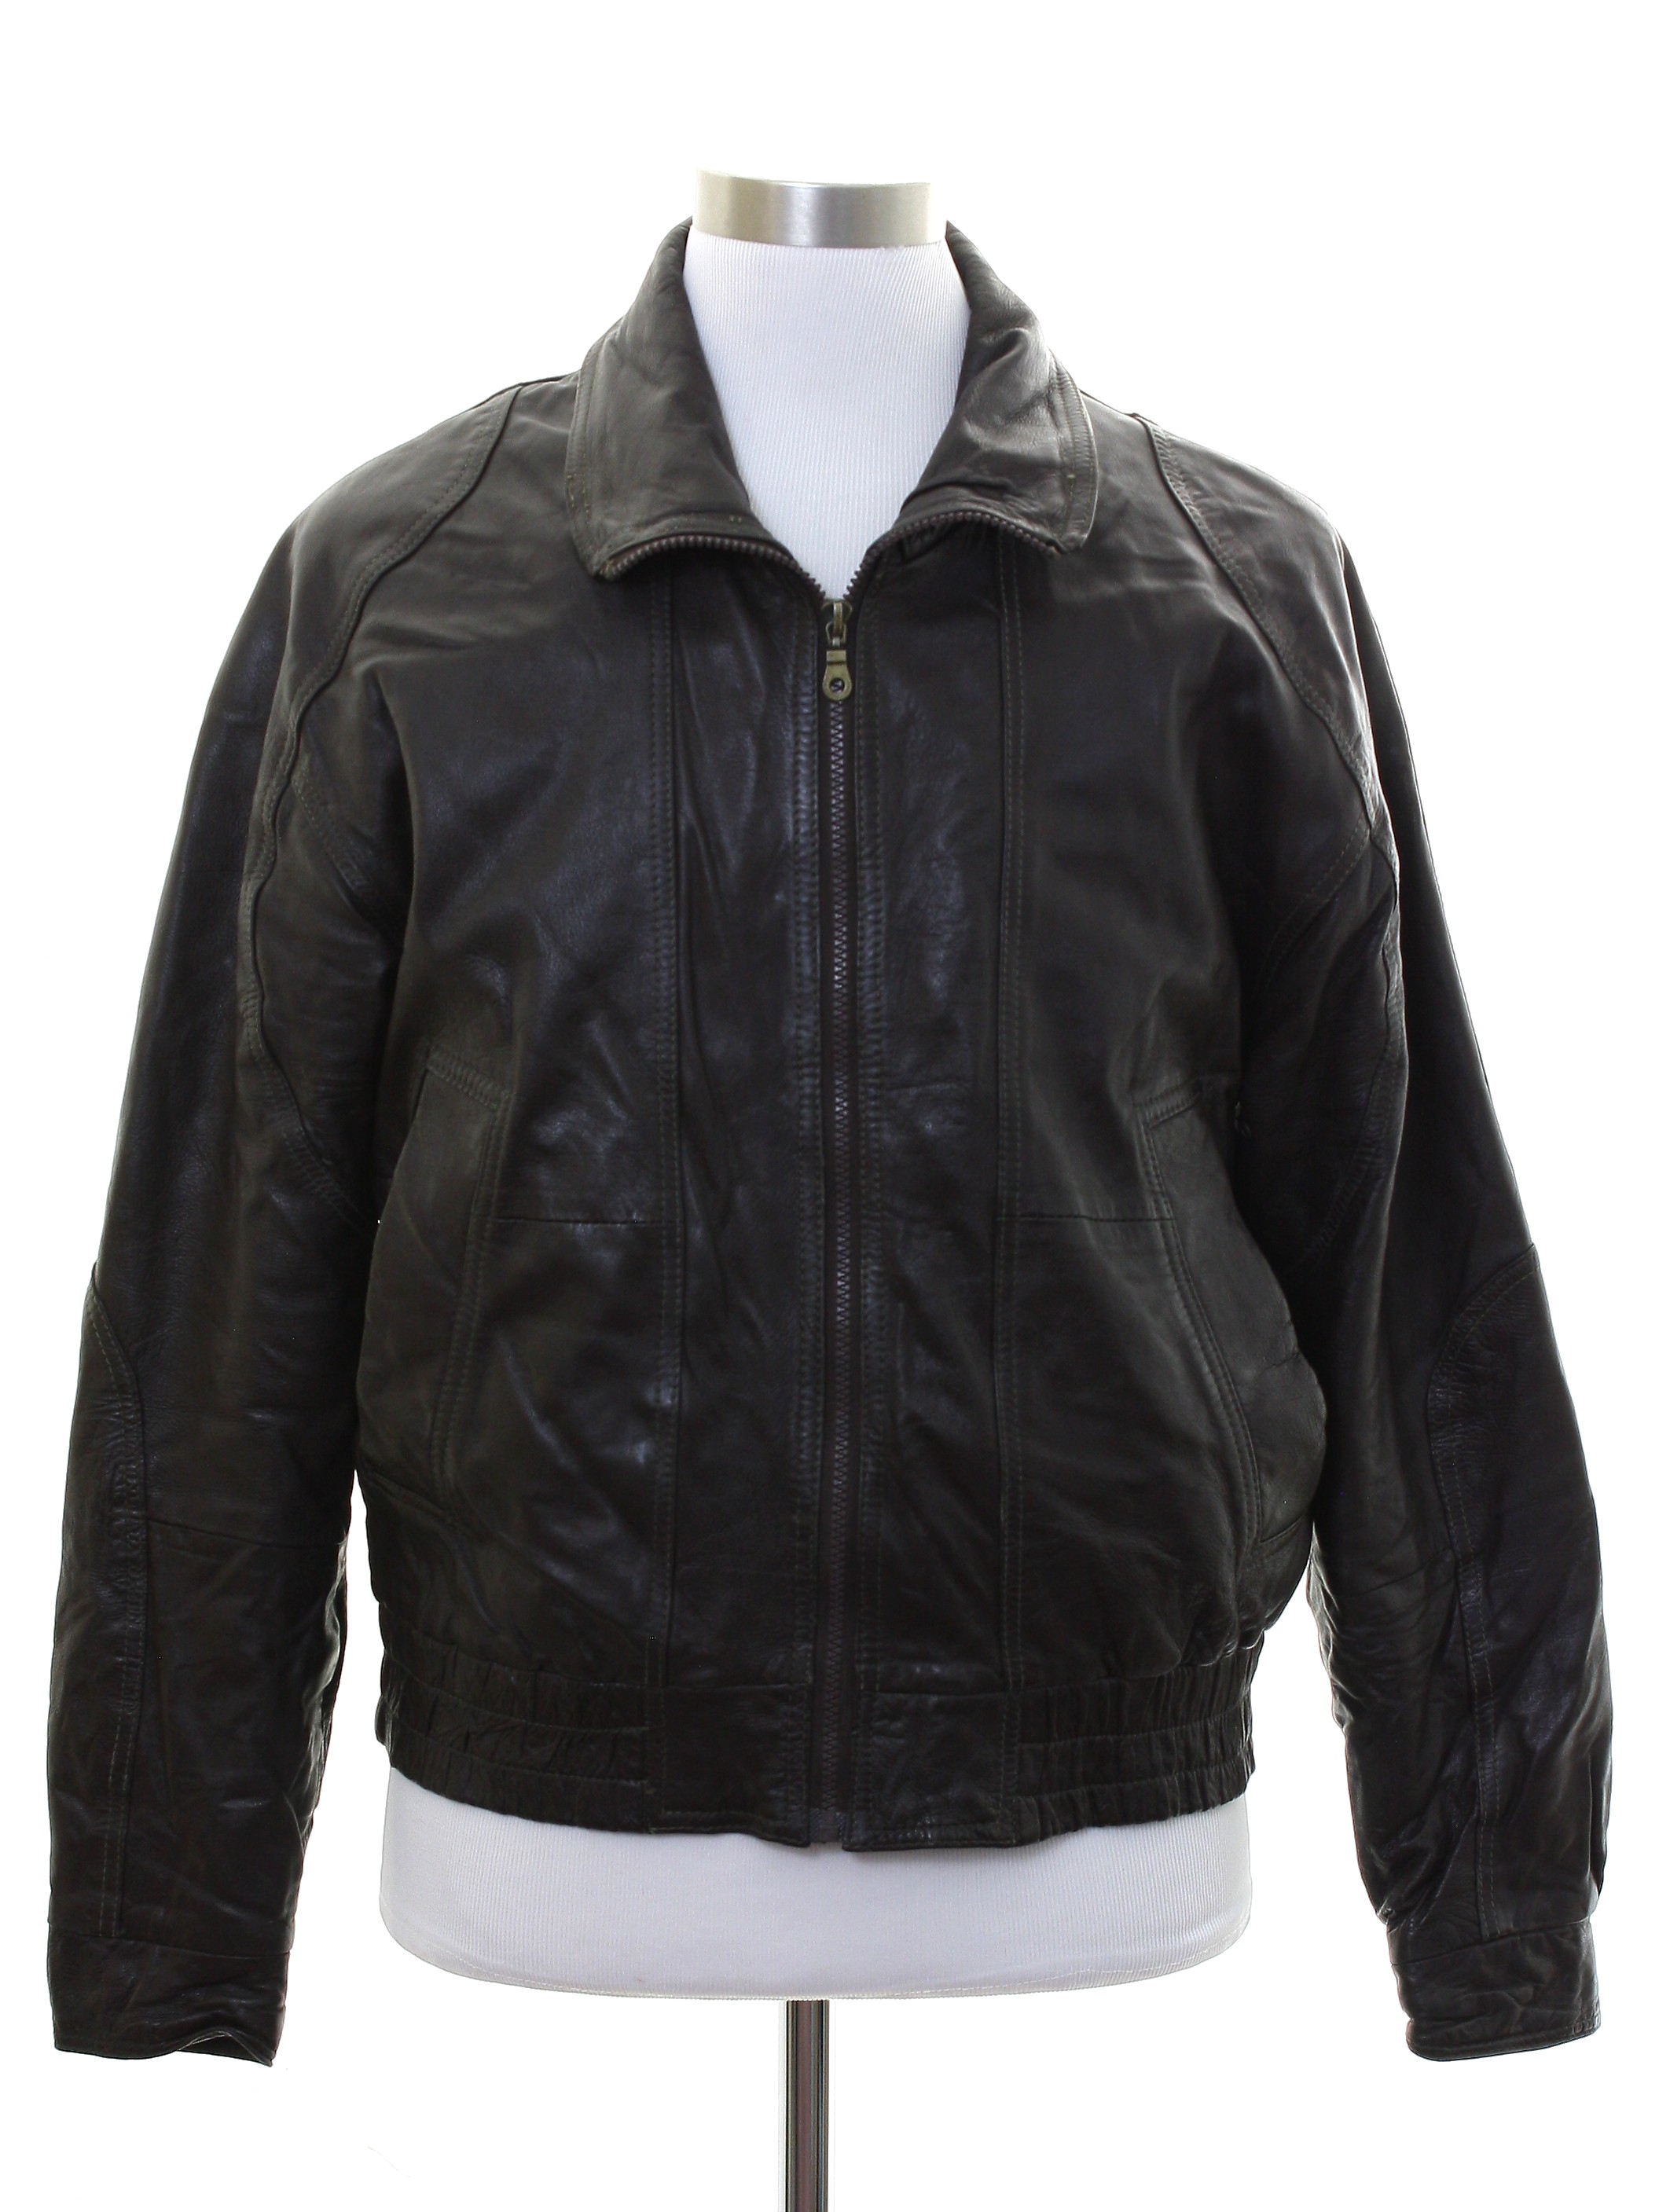 80s Vintage Cooper Collections Leather Jacket: 80s -Cooper Collections